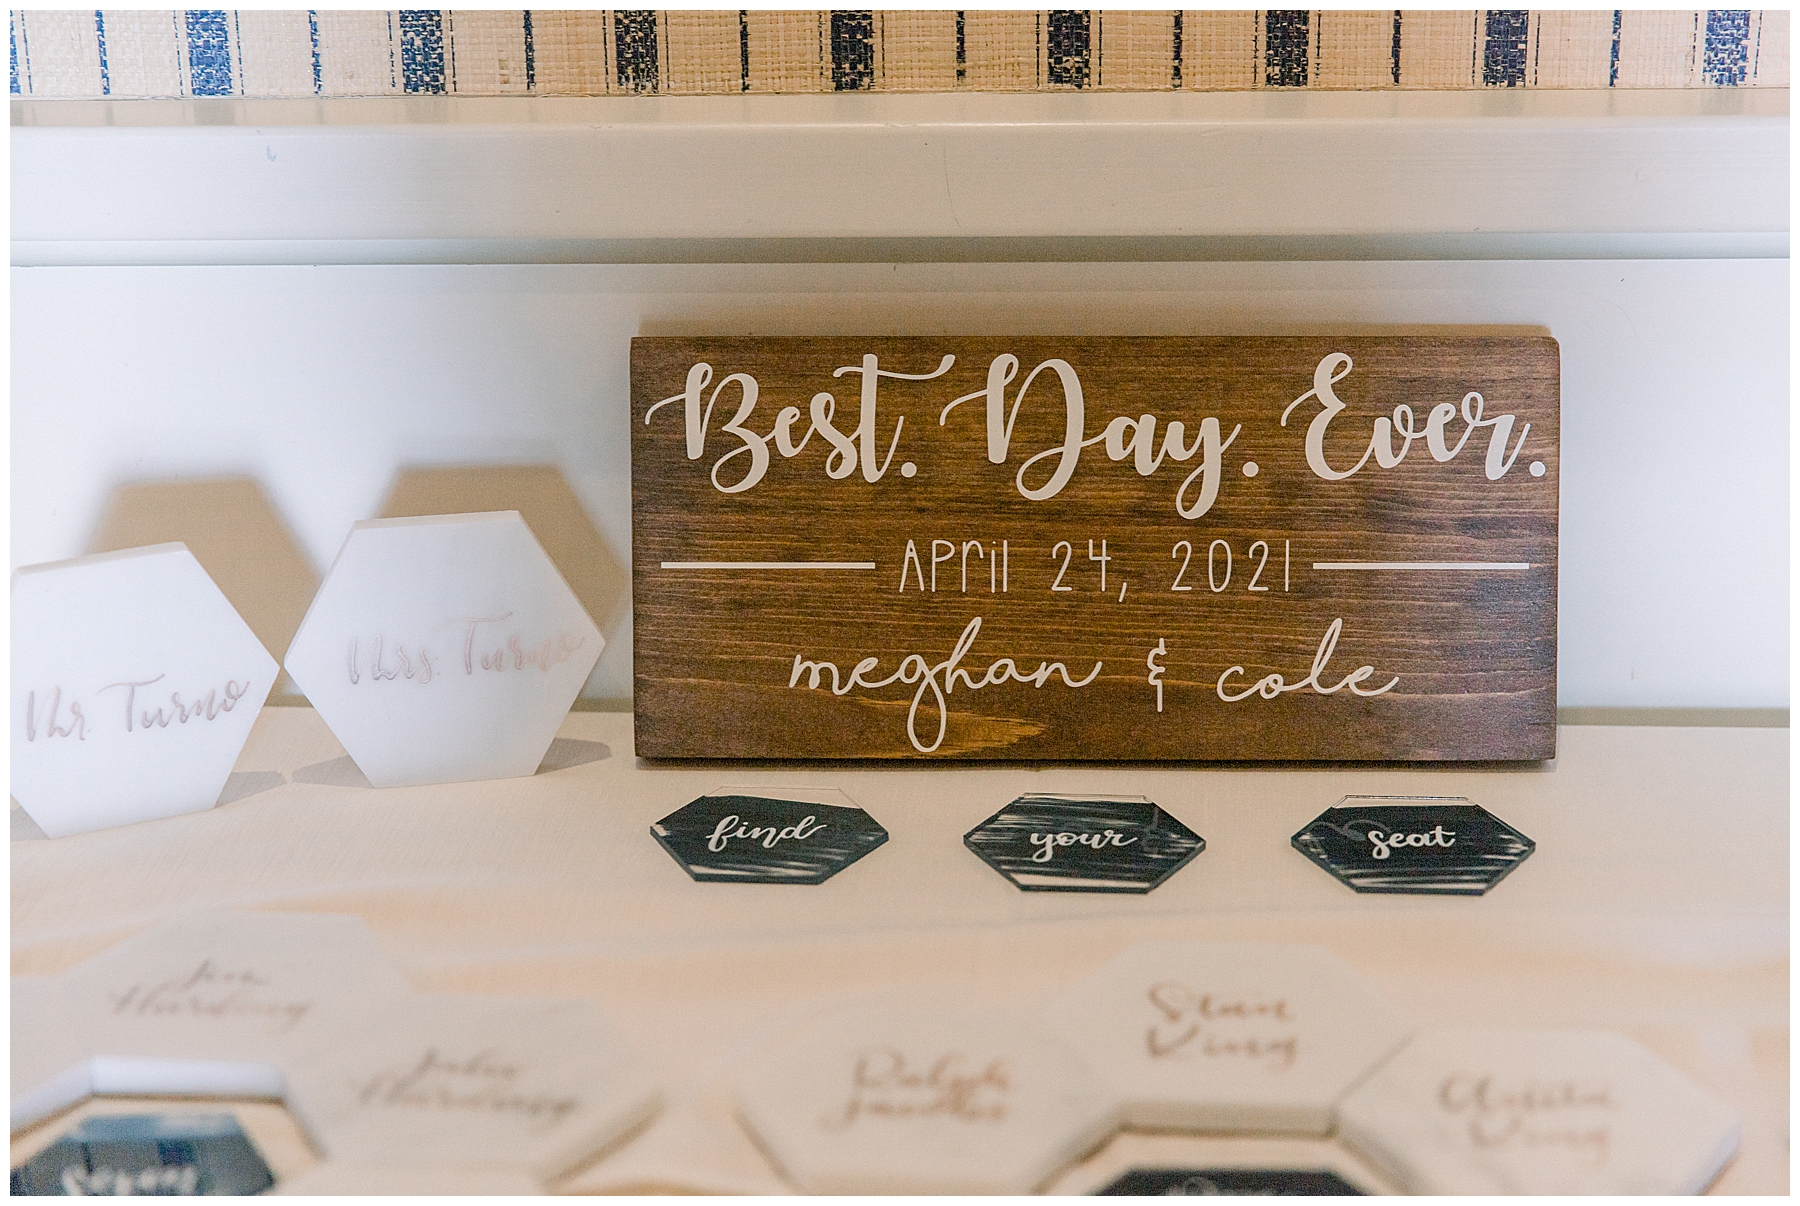 wedding day sign-Best day ever with wedding date and names